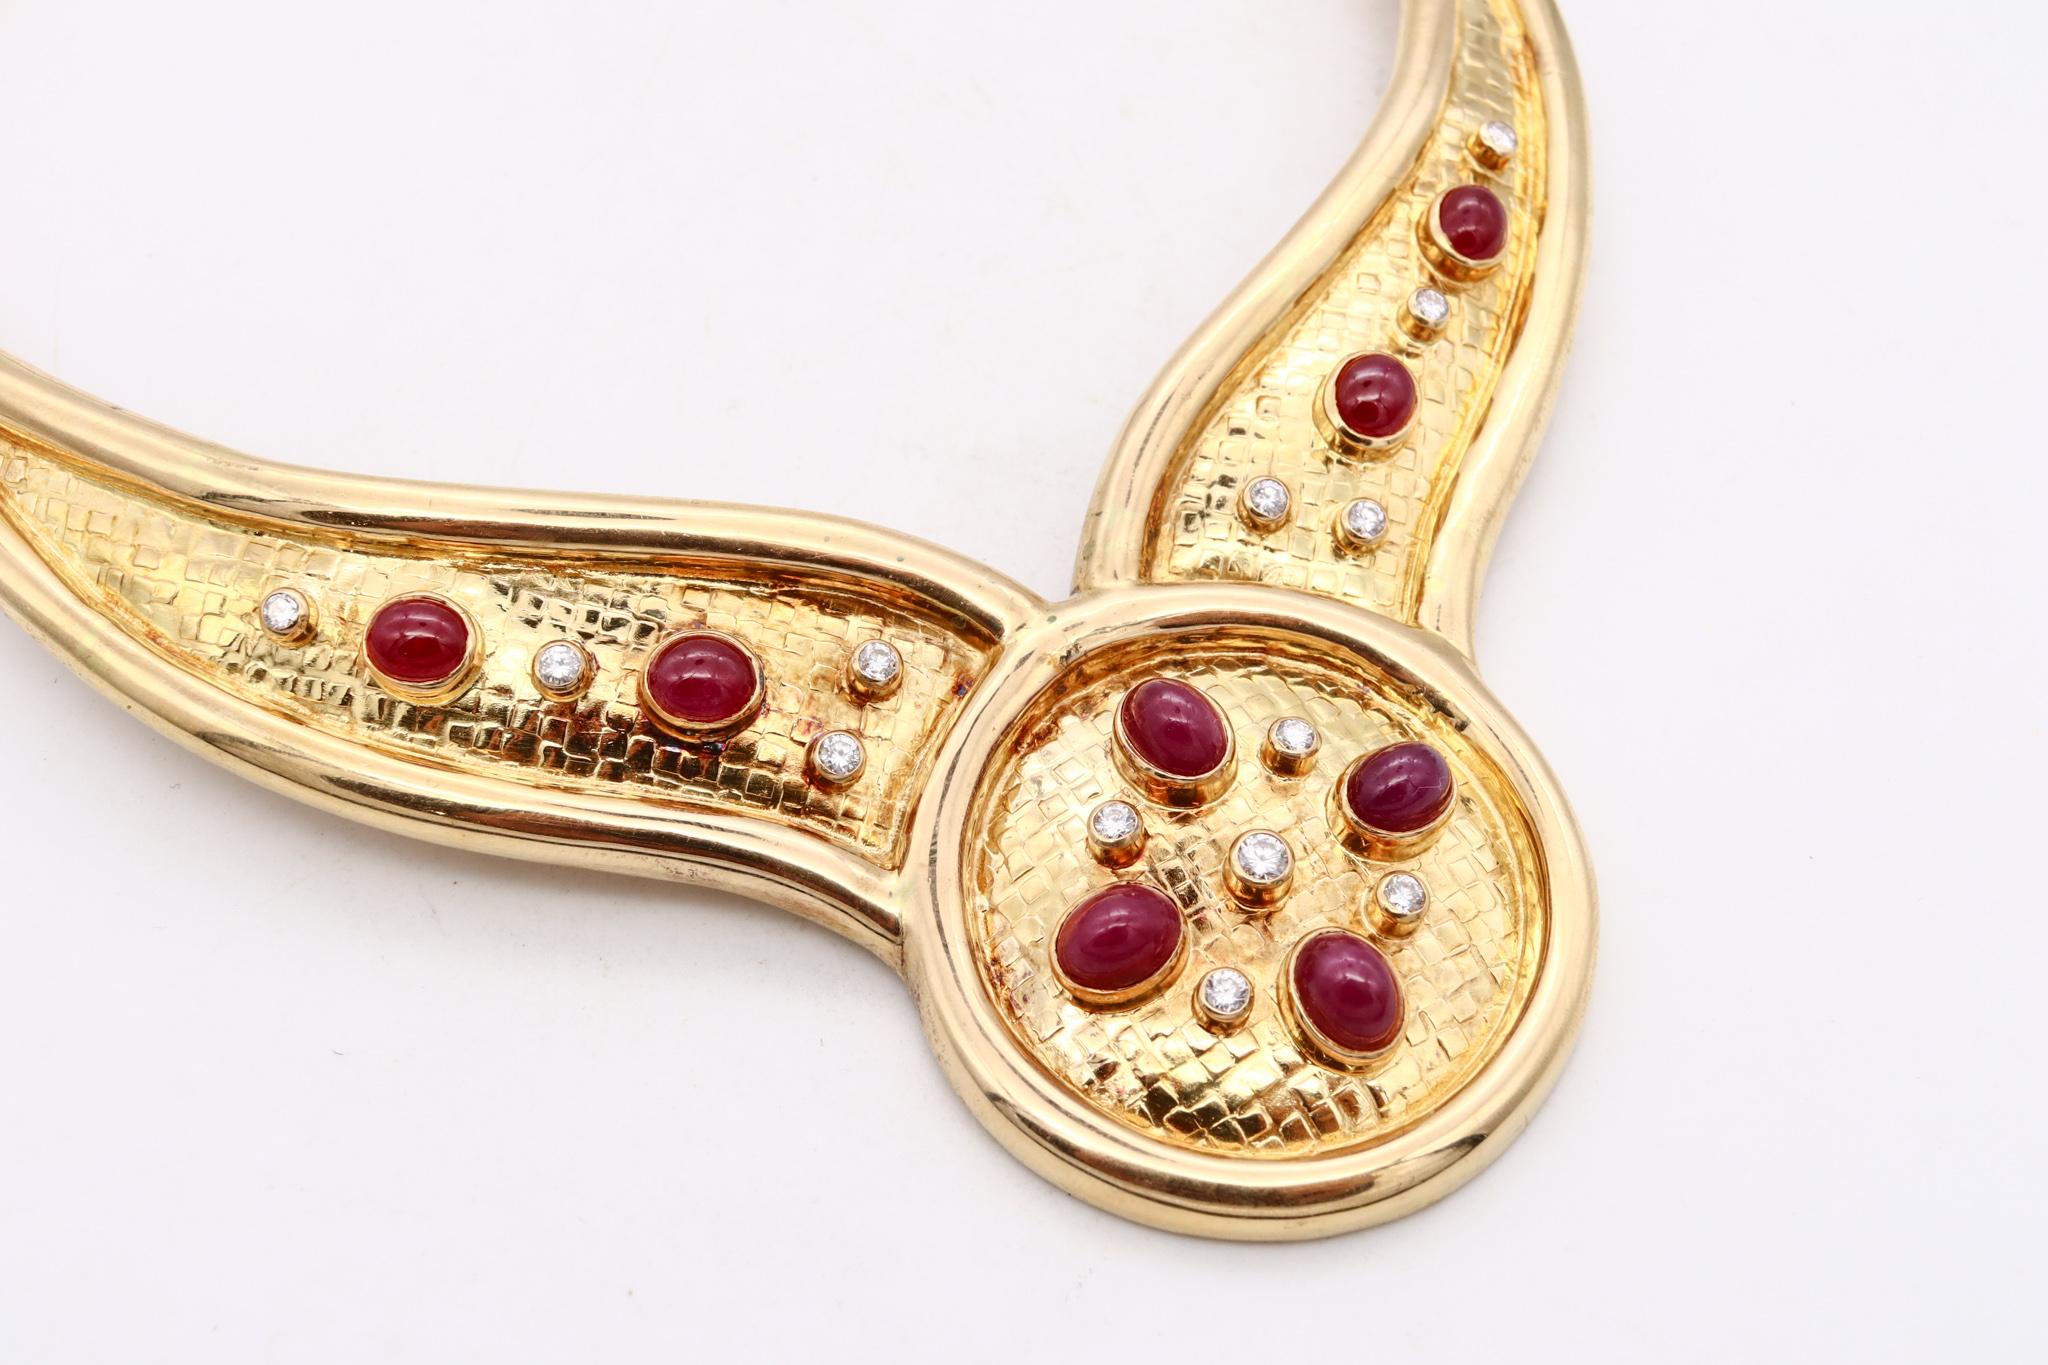 Lalaounis Greece Choker Necklace 18Kt Yellow Gold With 16.67 Cts Diamonds Rubies For Sale 1